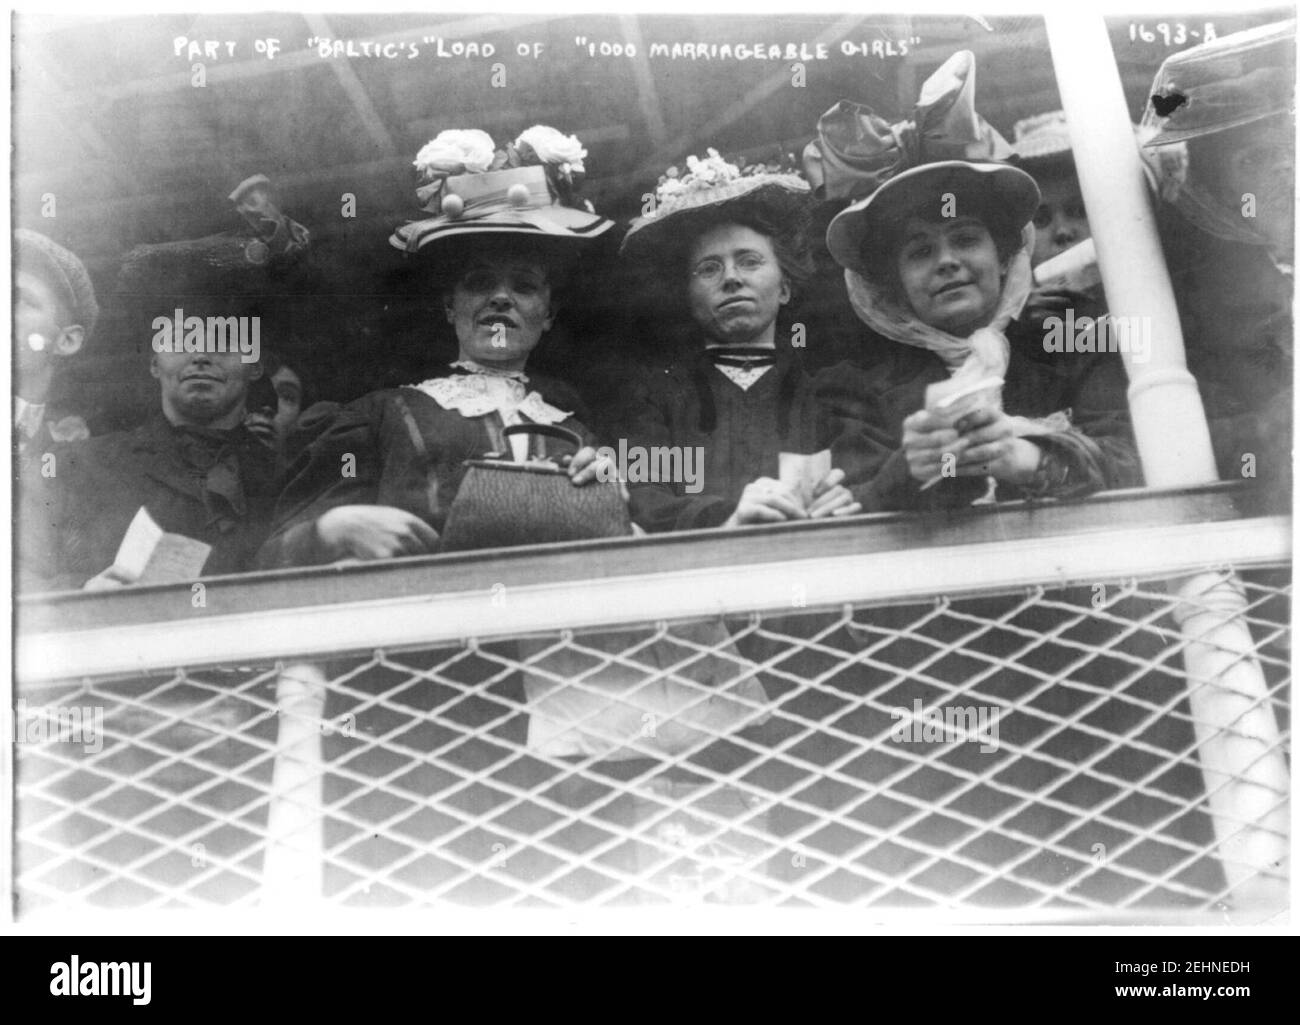 Part of BALTIC's boatload of 1000 marriageable girls. 1907 Stock Photo